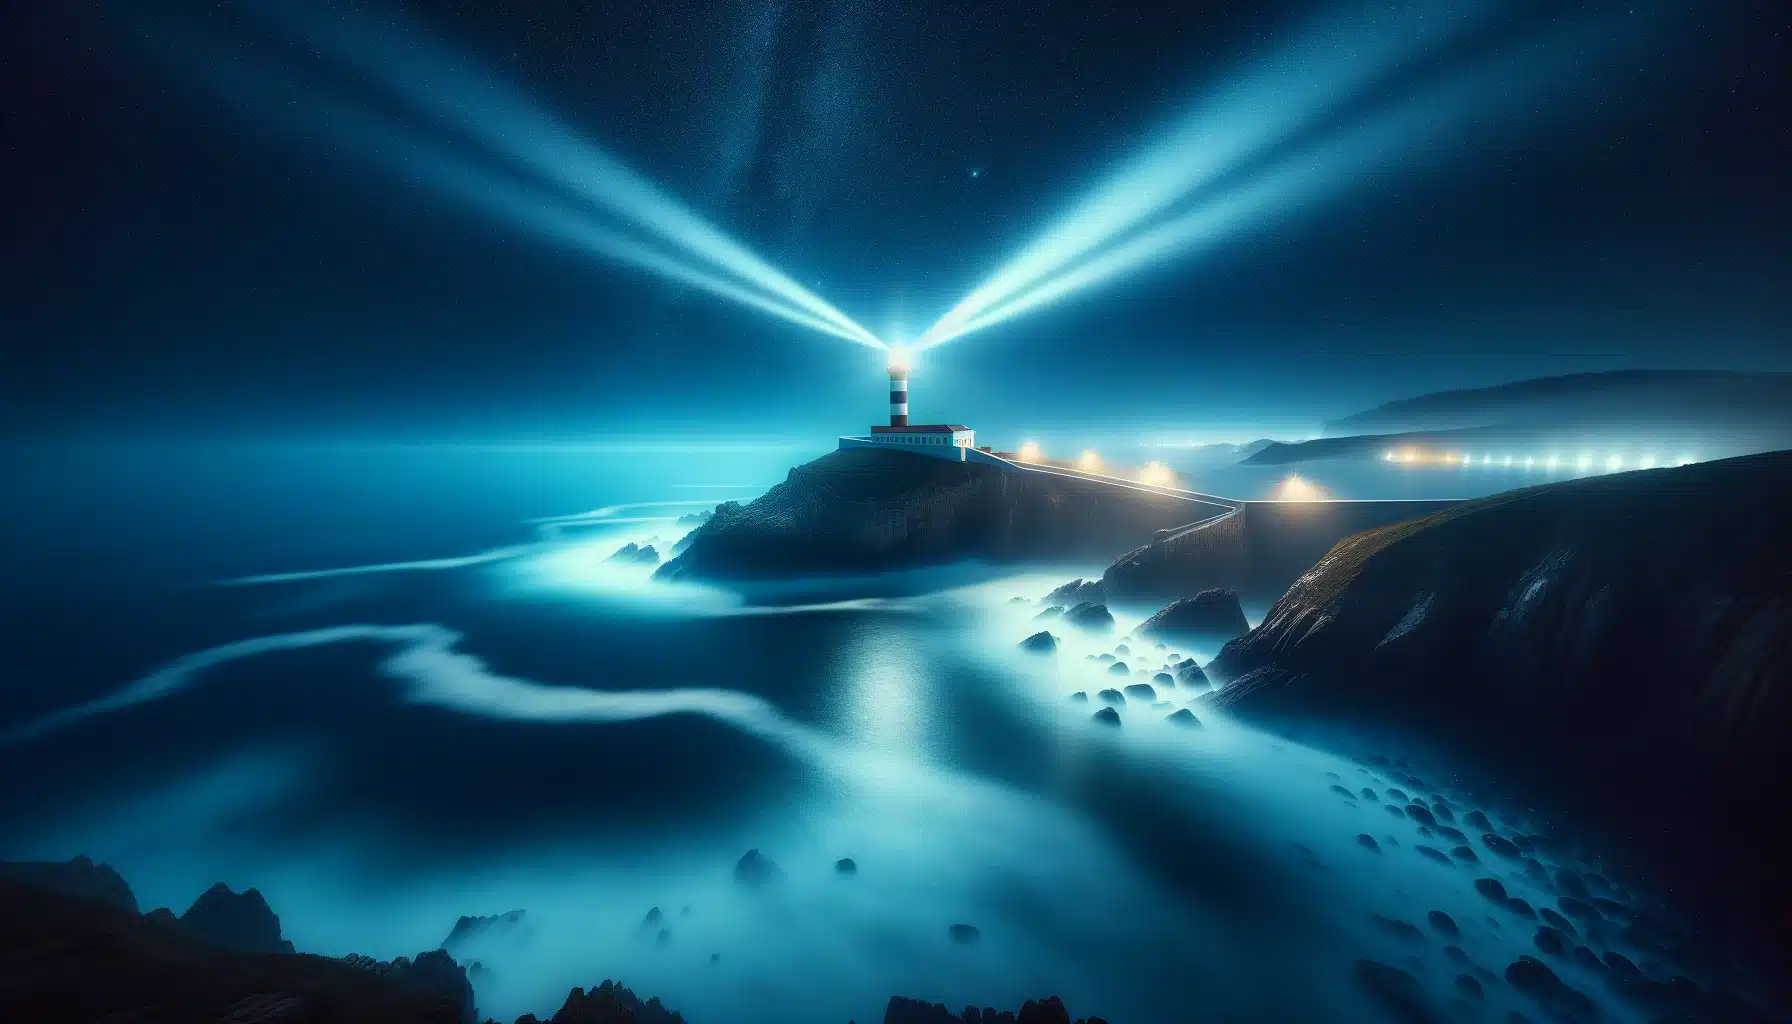 Coastal nightscape with a lighthouse, its beam creating an arc in long exposure photography, against a starry sky and smooth ocean.